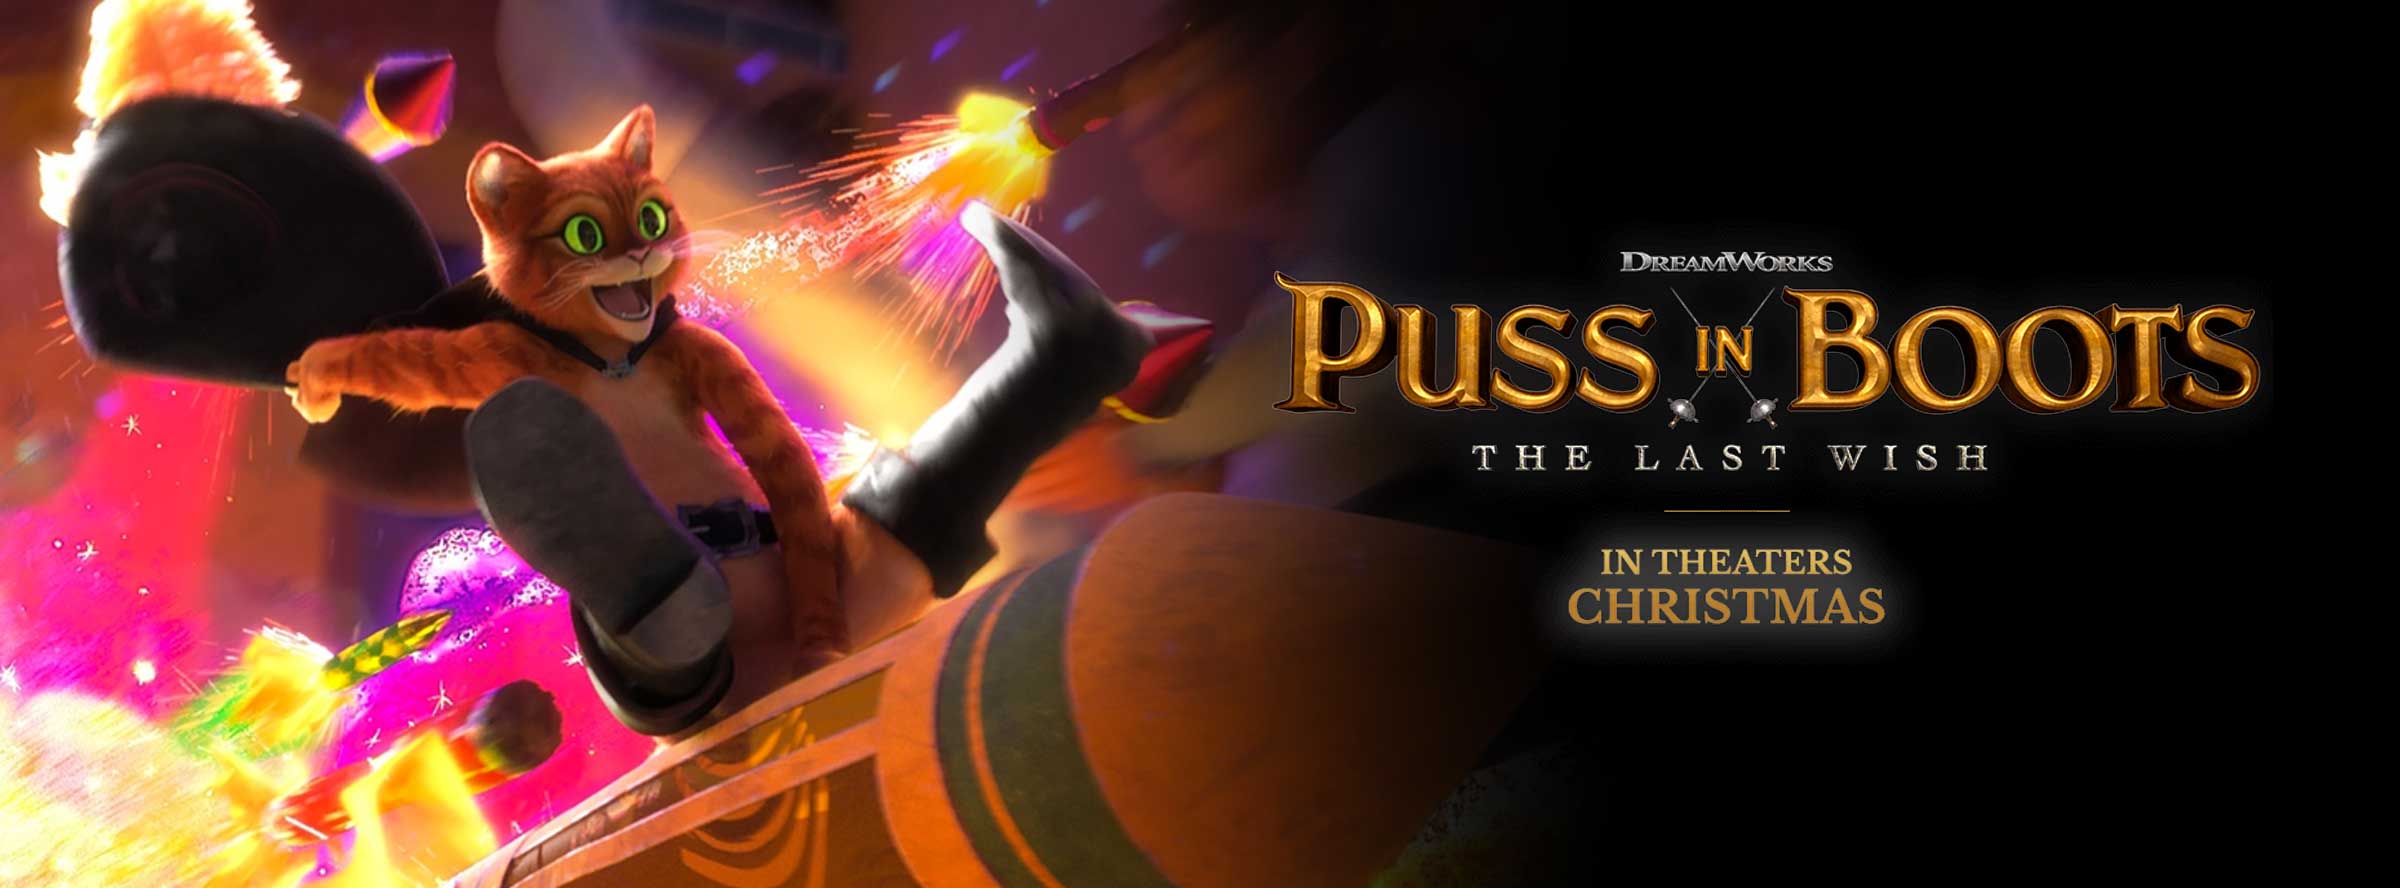 Slider Image for Puss in Boots: The Last Wish